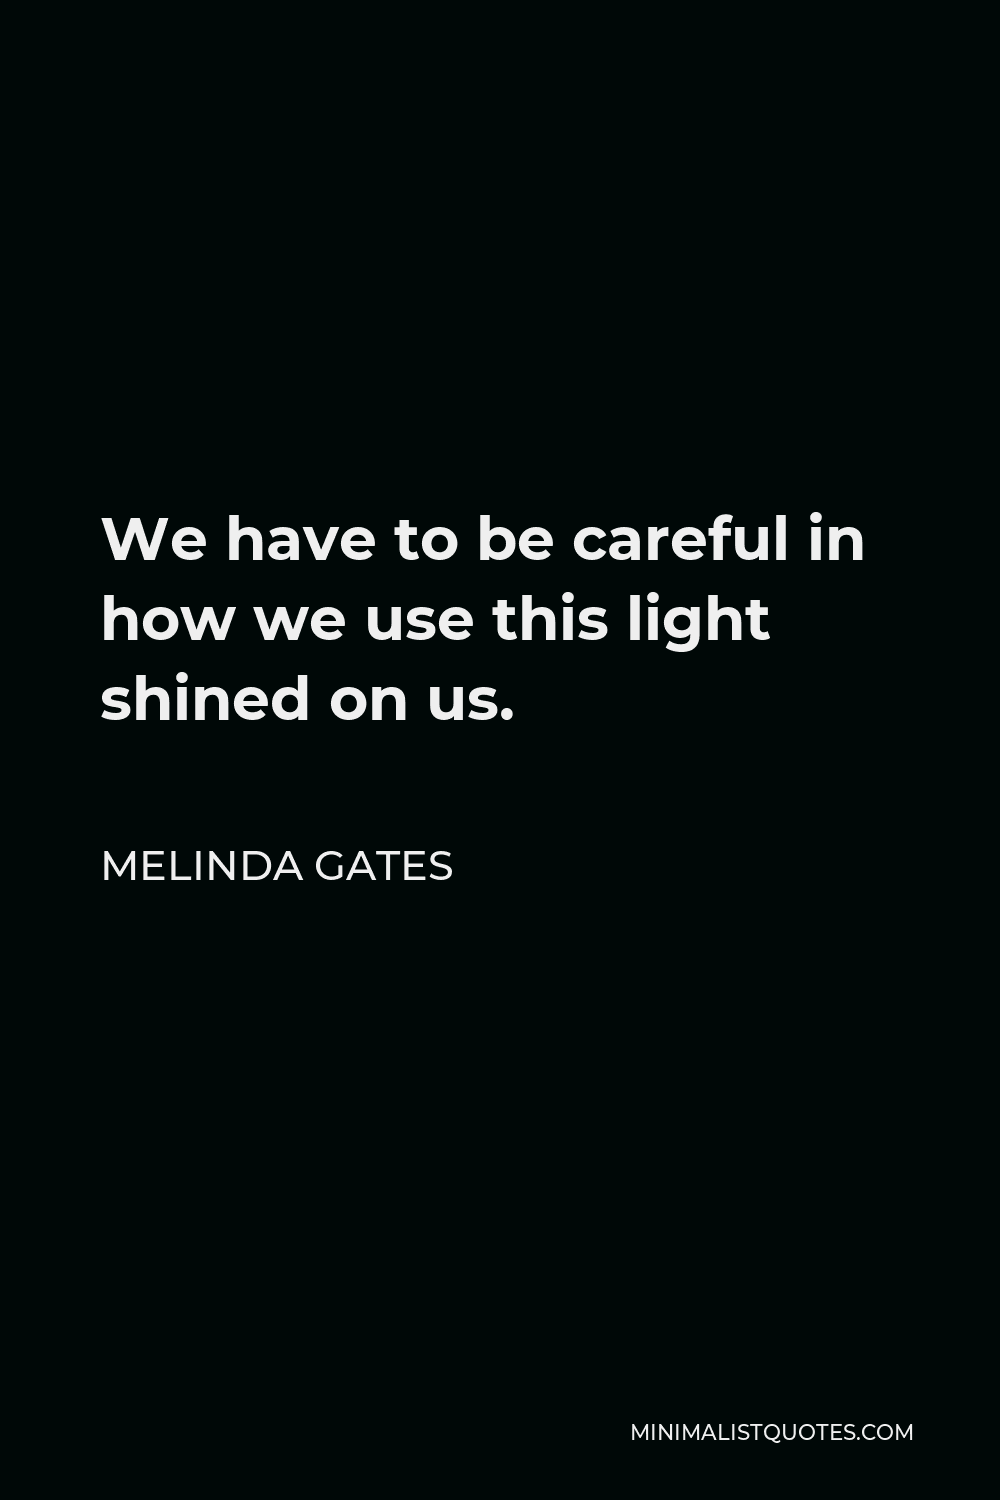 Melinda Gates Quote - We have to be careful in how we use this light shined on us.